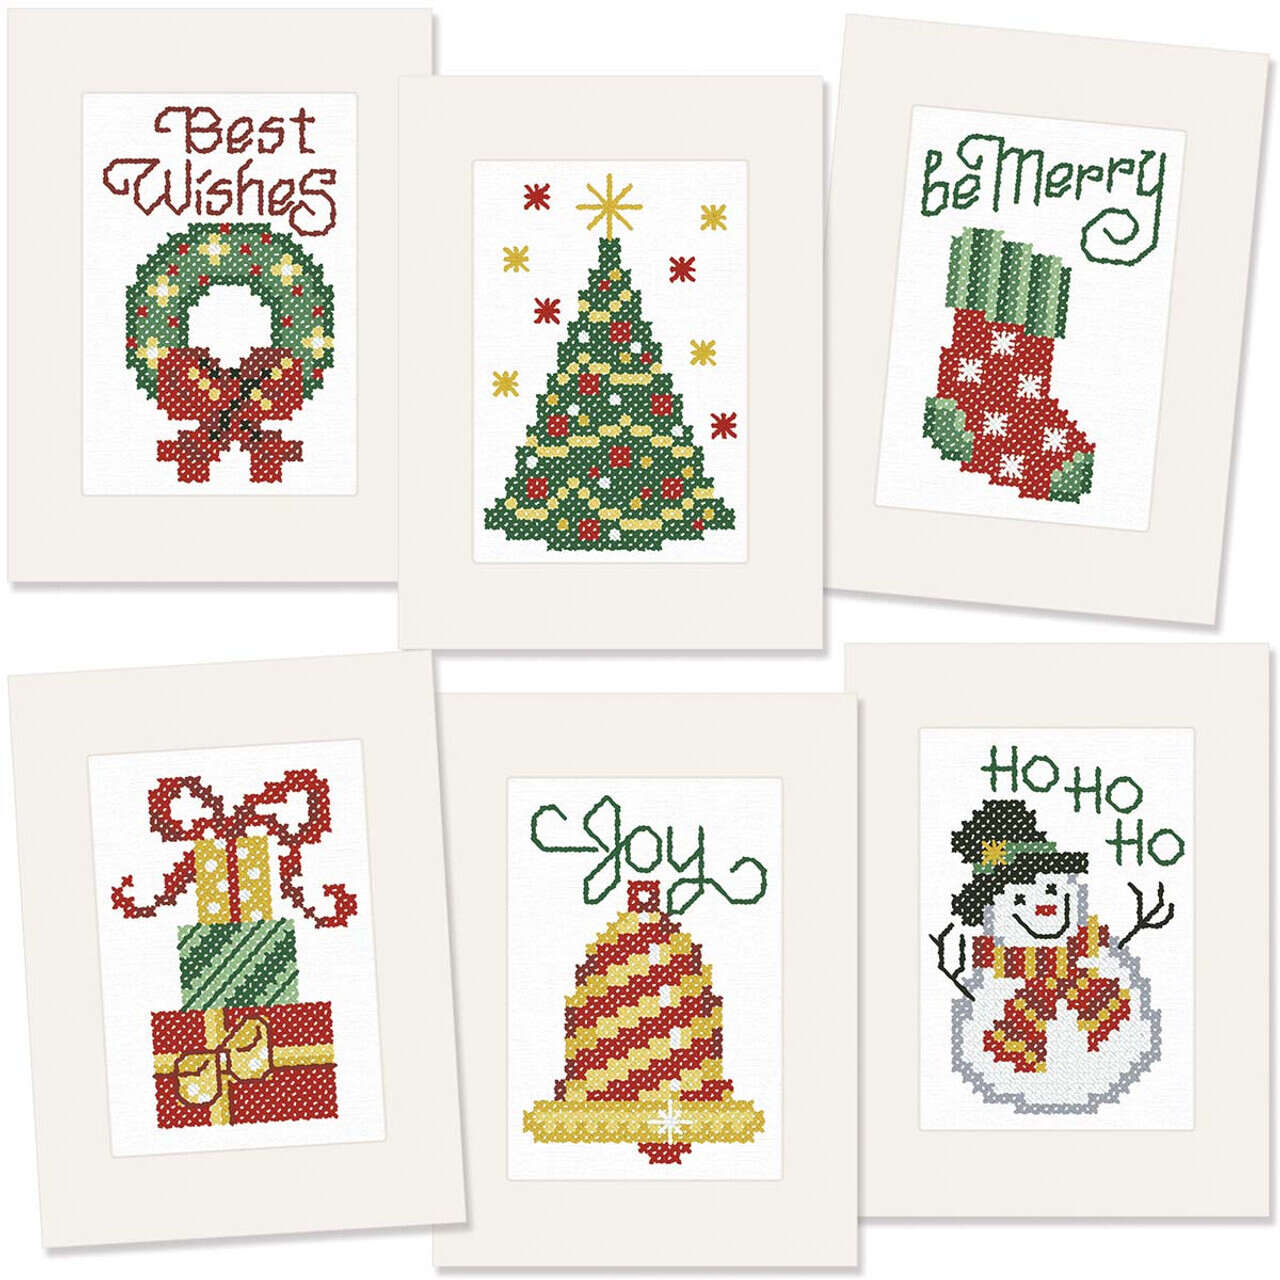 Herrschners Christmas Greeting Cards Stamped Cross-Stitch Kit